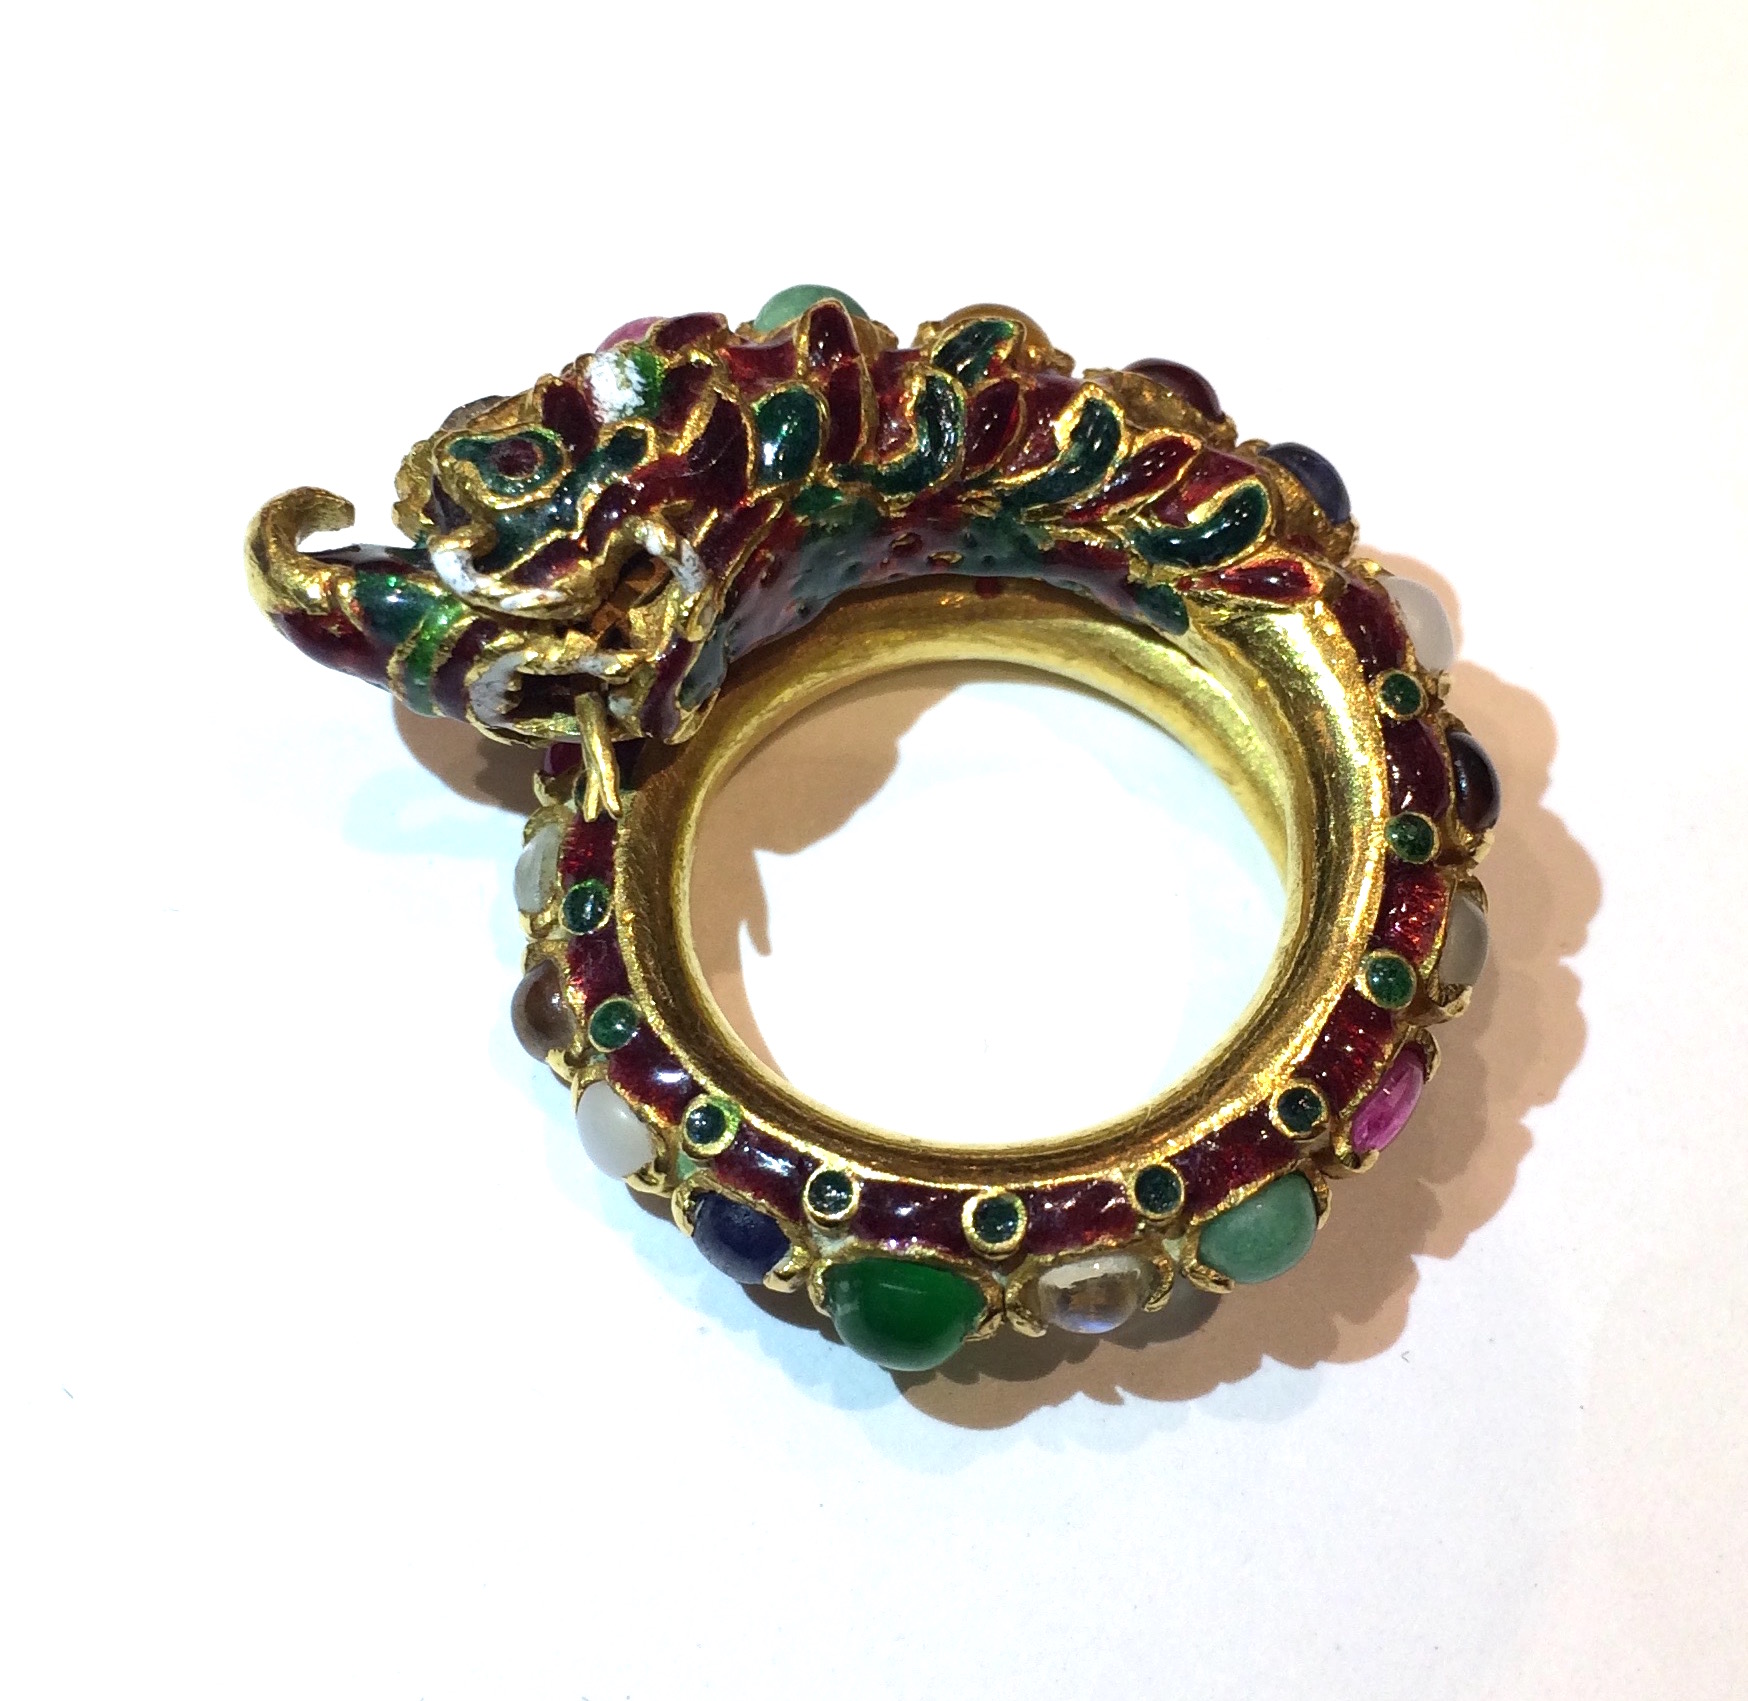 Burma, “Naga” dragon ring, high carat gold (22K +) enameled and set with 27 cabochons consisting of rubies, sapphires, emeralds, diamonds and other precious stones, second half 18th Century